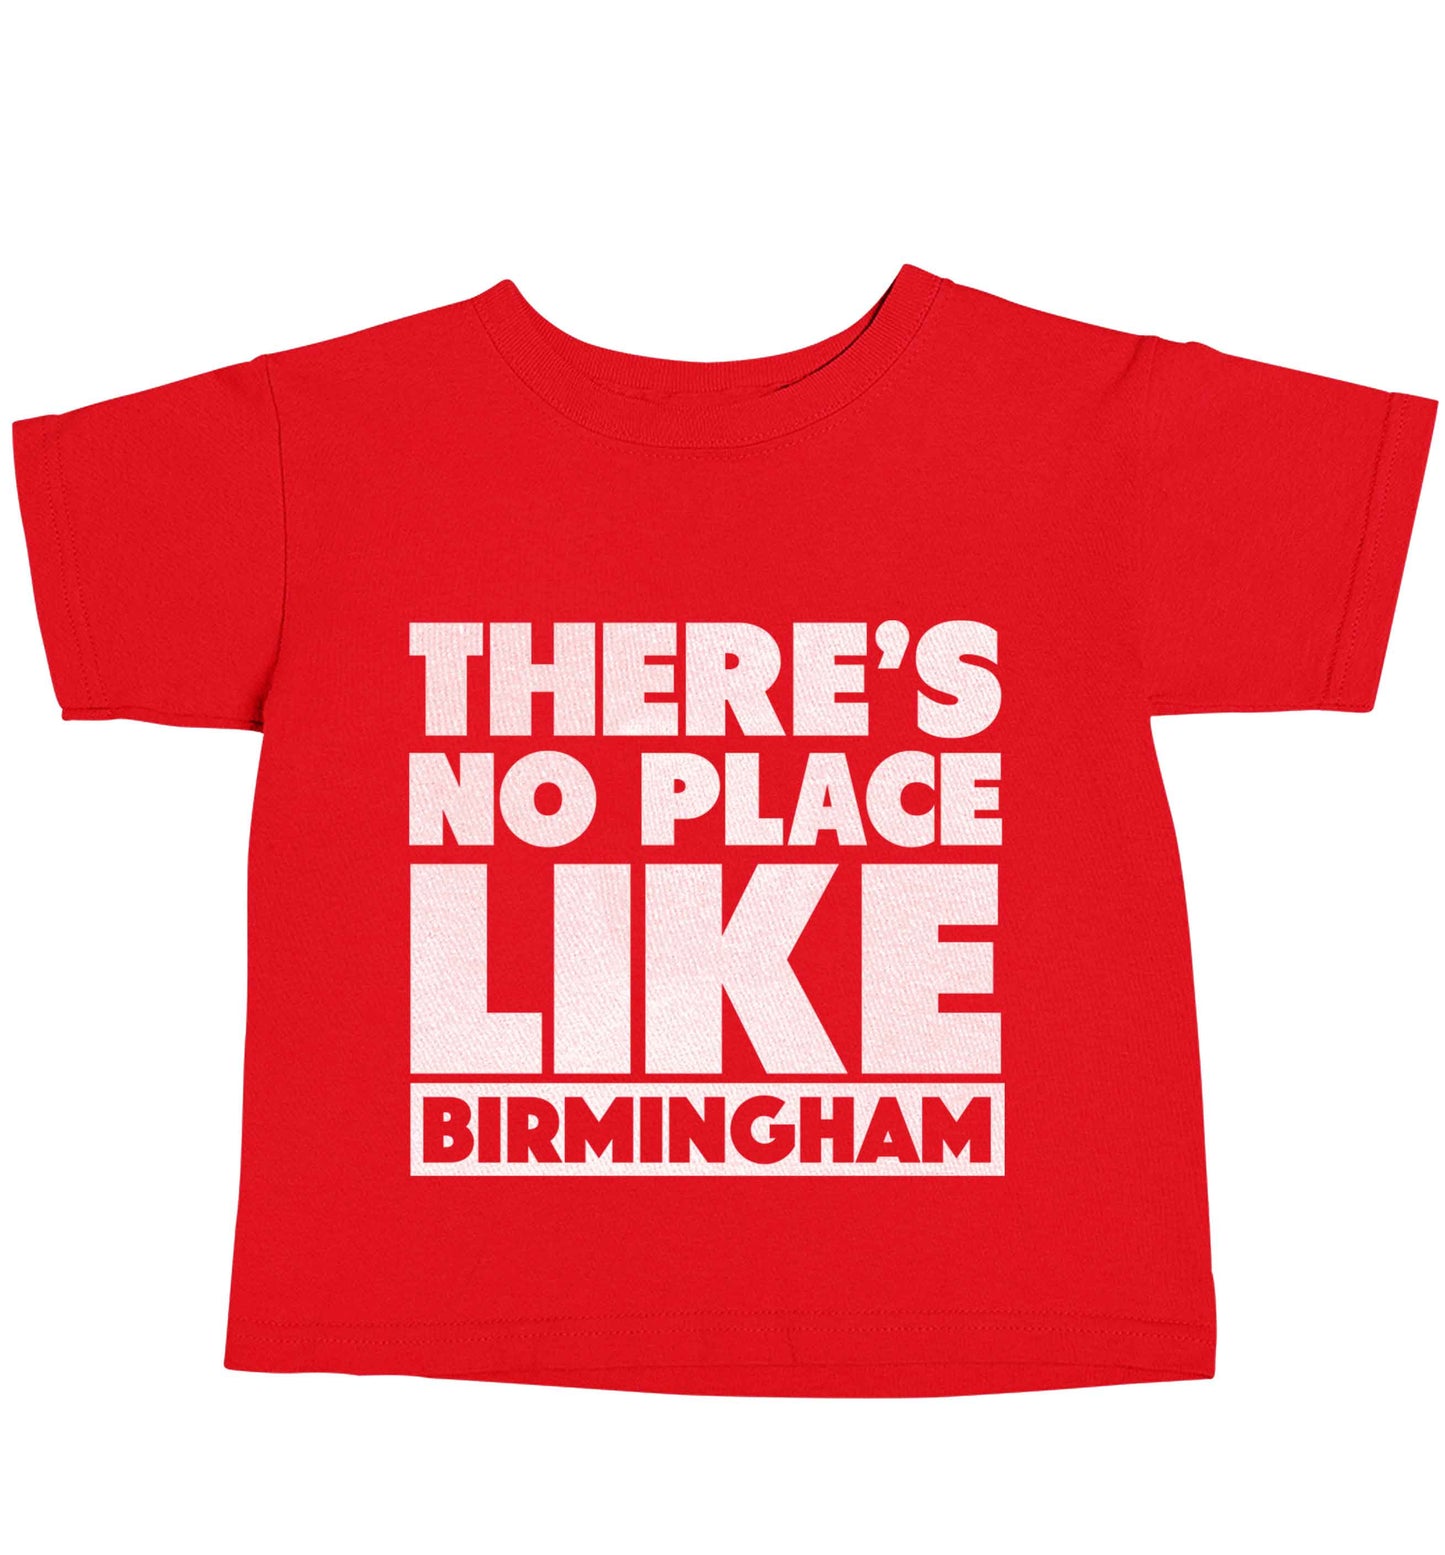 There's no place like Birmingham red baby toddler Tshirt 2 Years